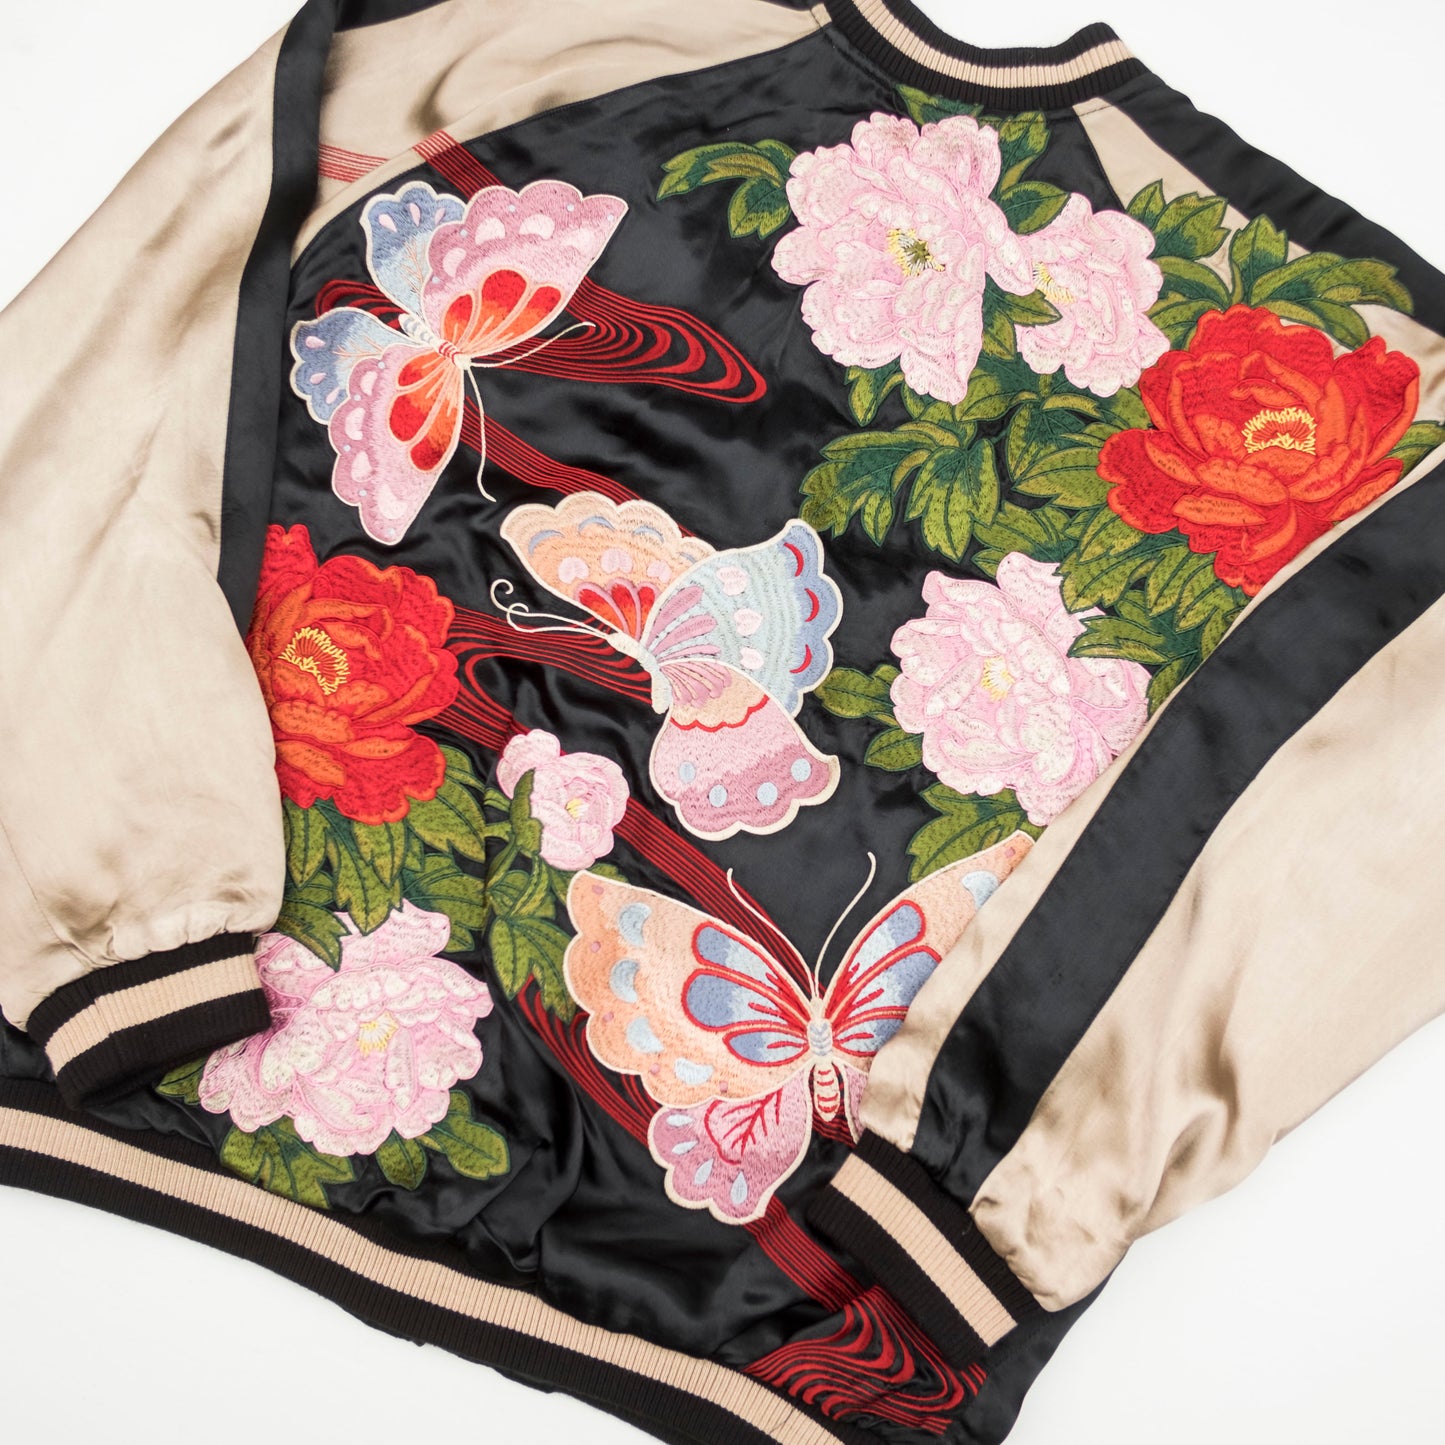 Sexy Chic Japanese Japan Butterfly Chocho Butterflies Floral Flowers Flower Garden Embroidered Embroidery Sukajan Sukajum Souvenir Reversible Jacket ( Size : L )